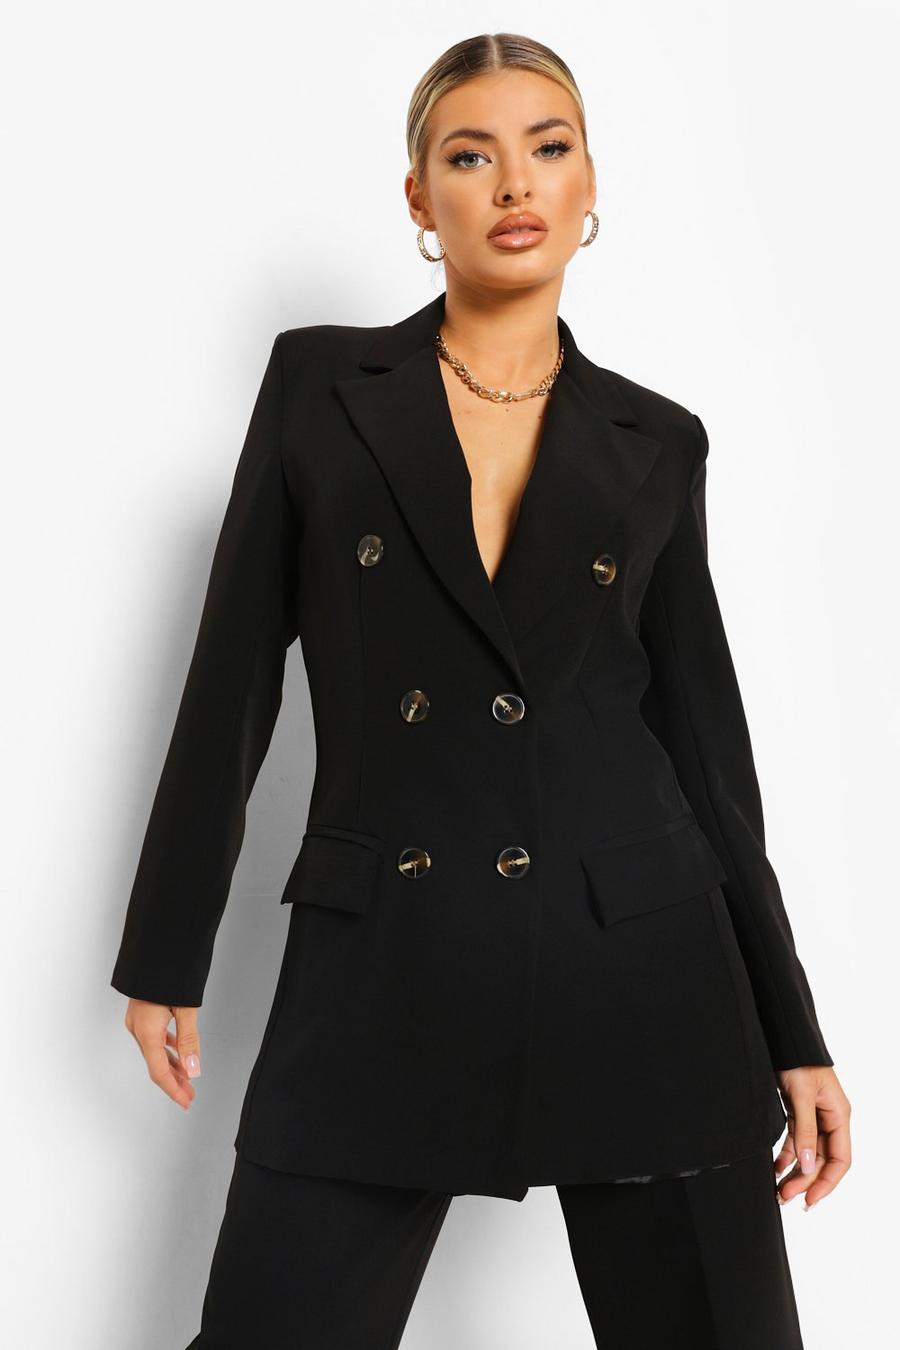 boohoo Women's Double Breasted Tailored Coat